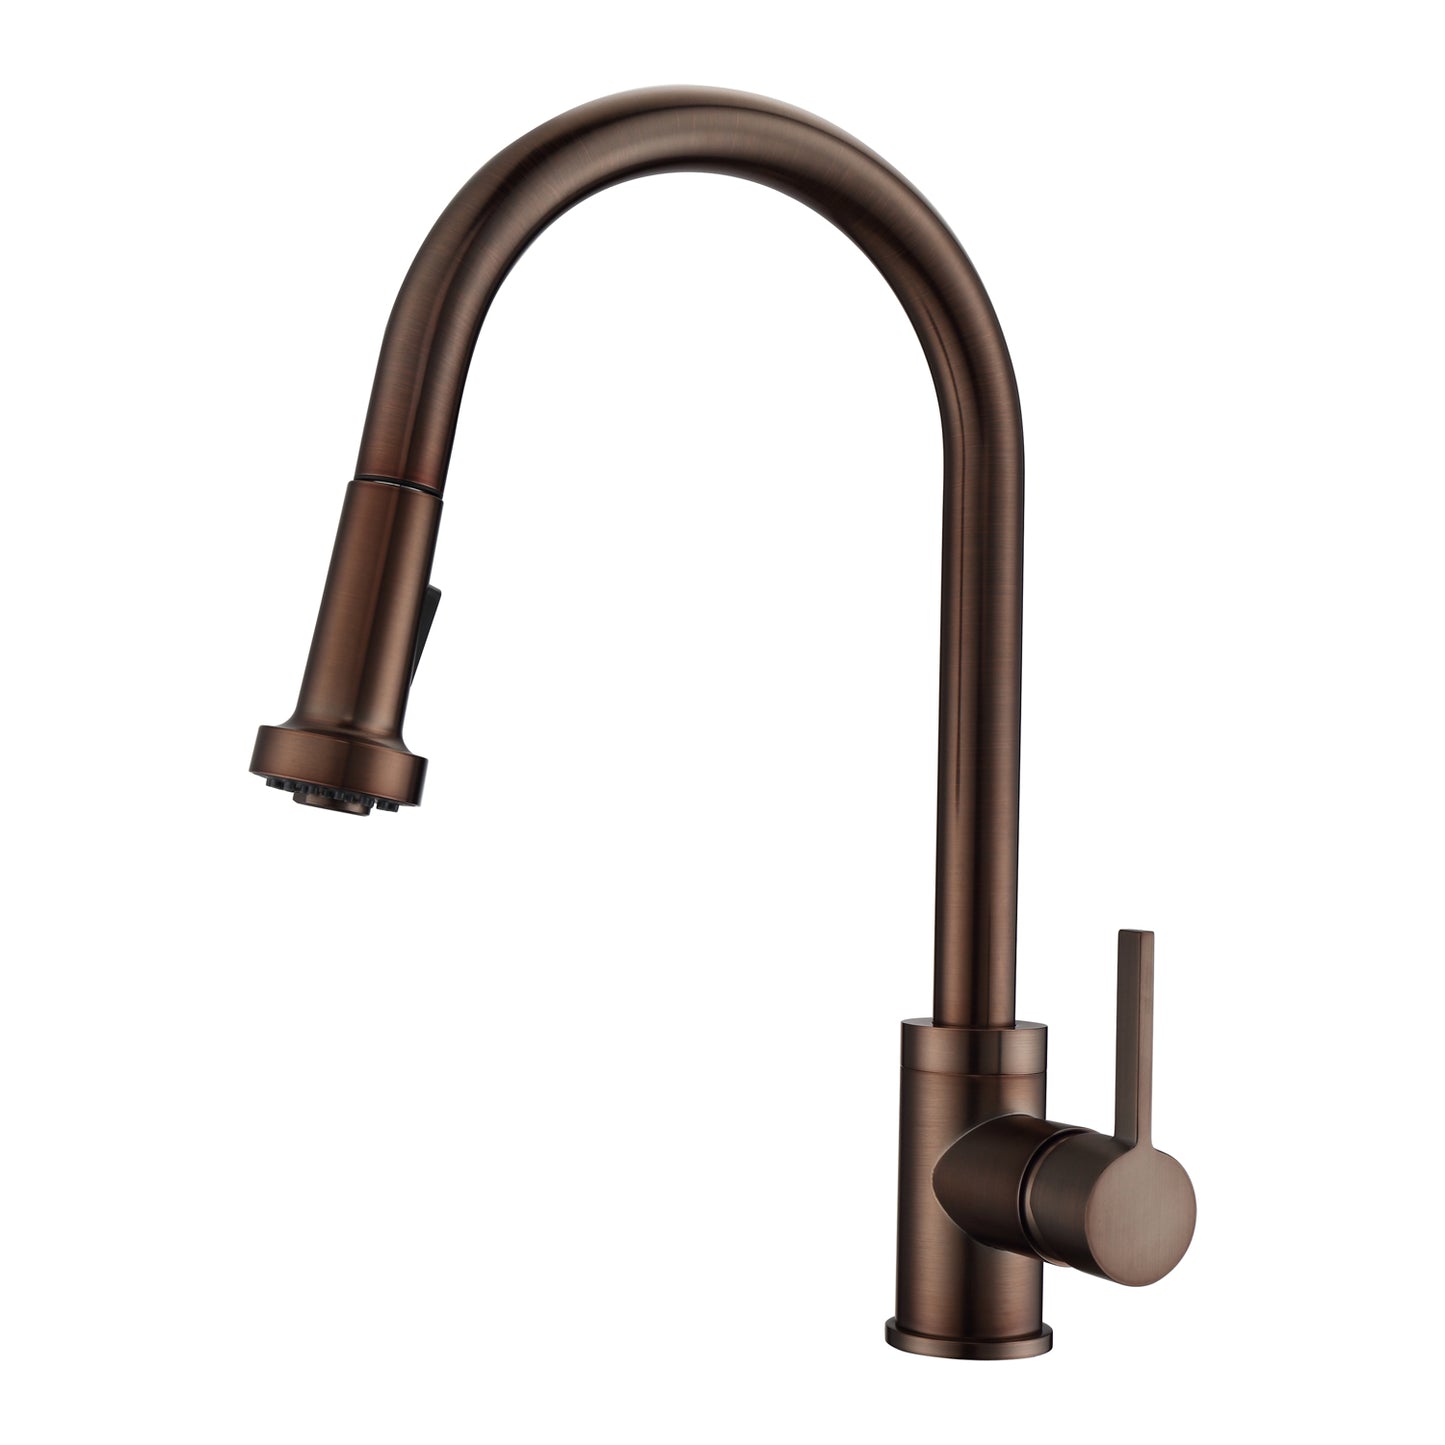 Fairchild 1 Kitchen Faucet, Pull-Out Sprayer, Single Lever Handle, Oil Rubbed Bronze